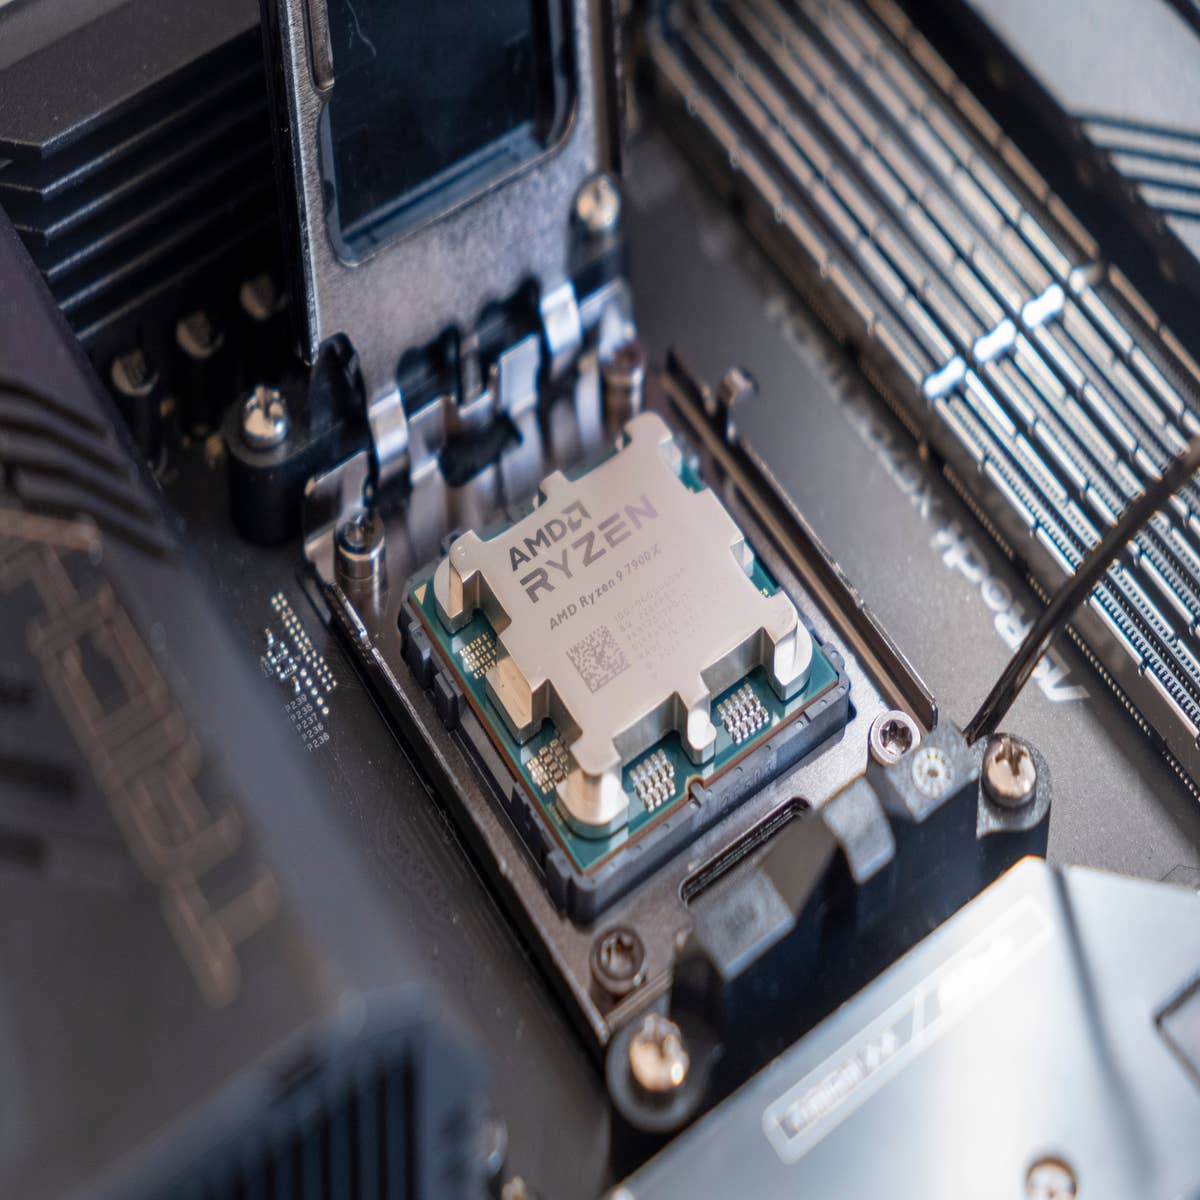 Intel Core i7-11700K Review: The Chip of Last Resort